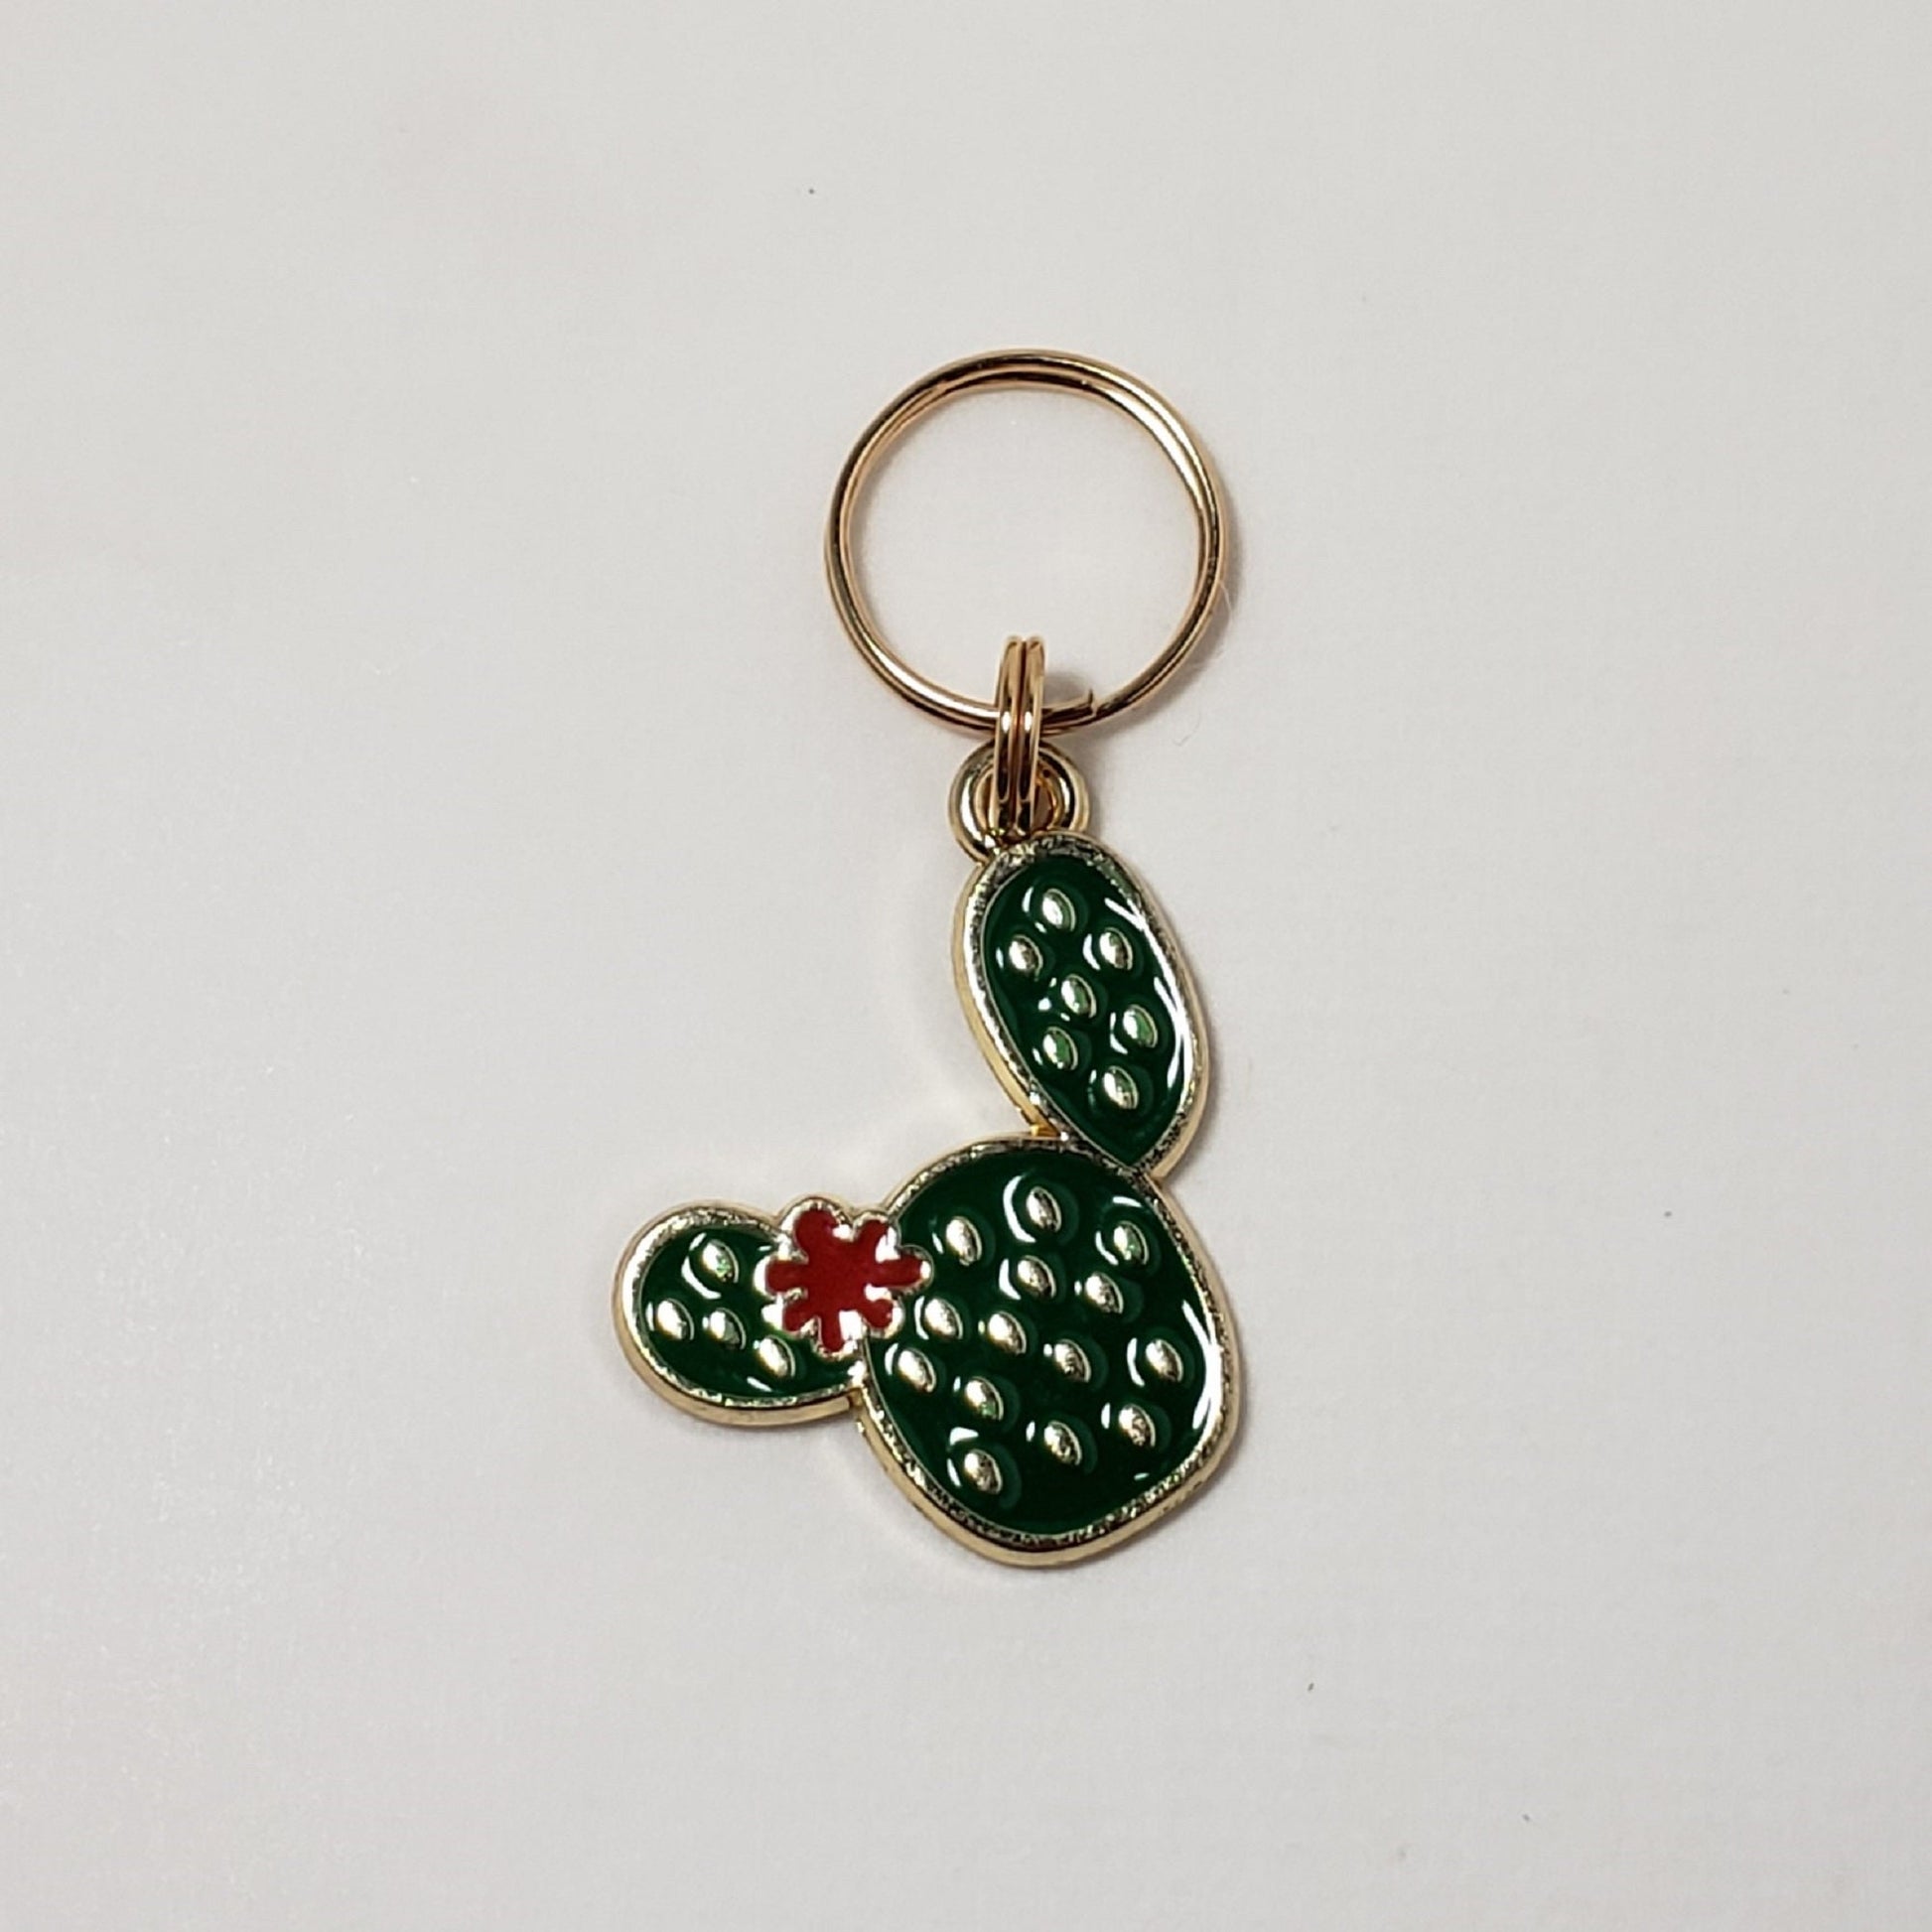 Cactus Stitch Markers for Knitting, 4pc mixed set | Crochet stitch marker, progress keeper, project bag charms, crochet accessories